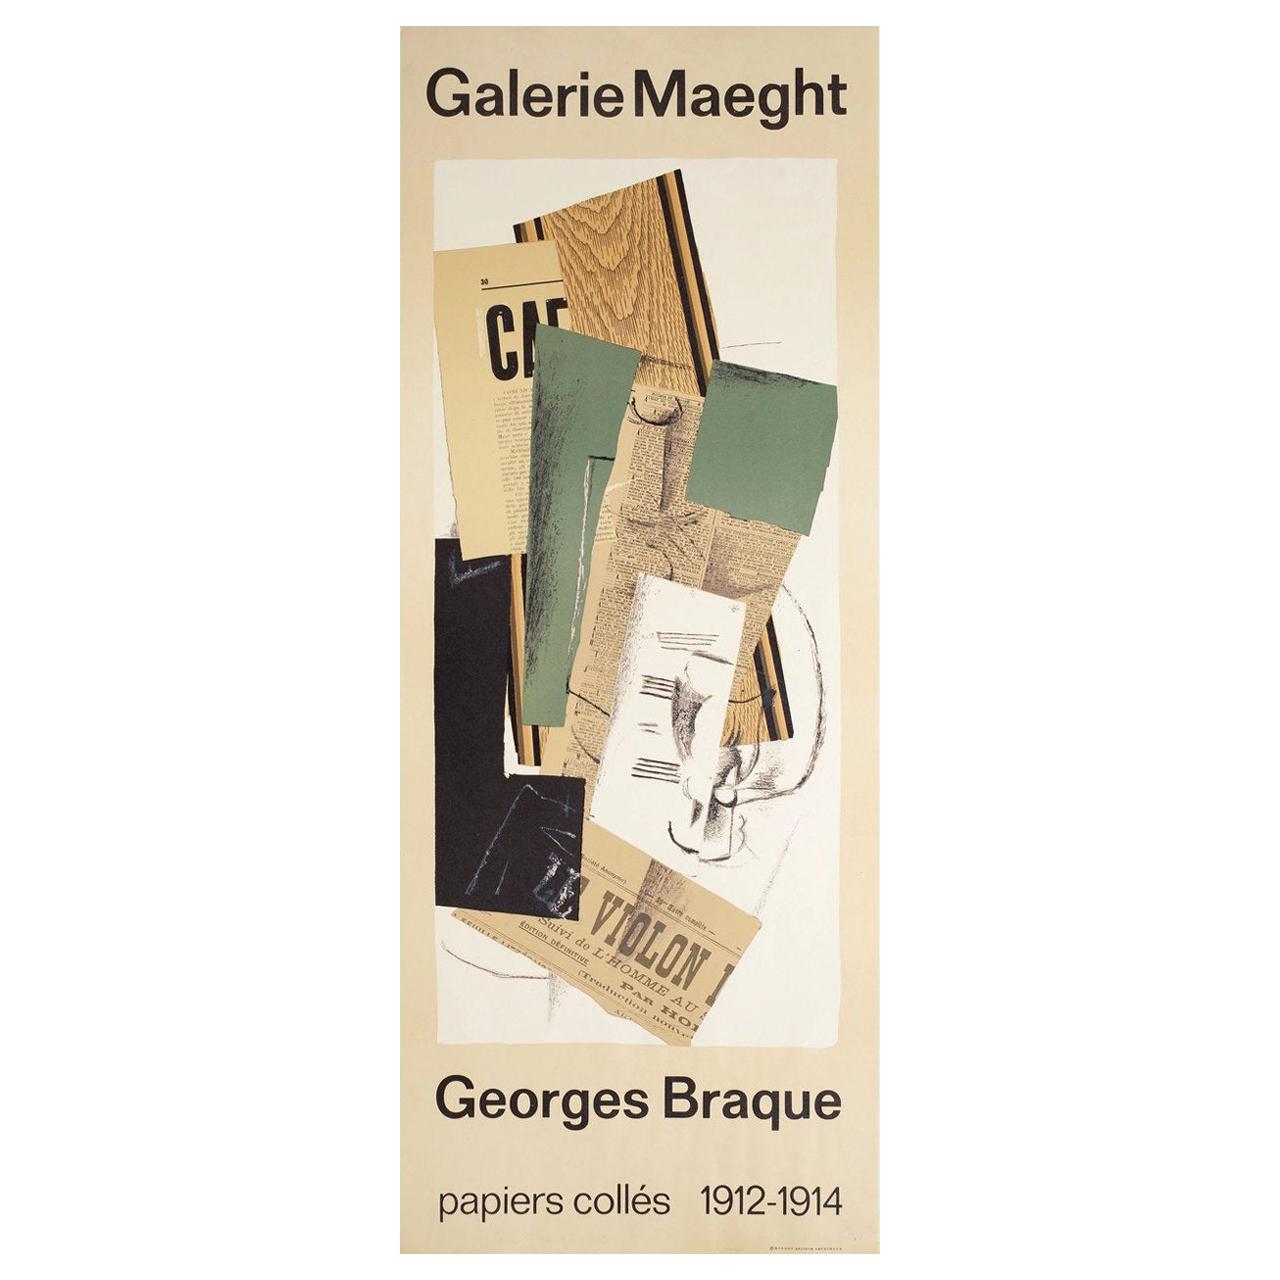 Georges Braque Papiers Colles 1912-1914 1970s French Insert Exhibition Poster